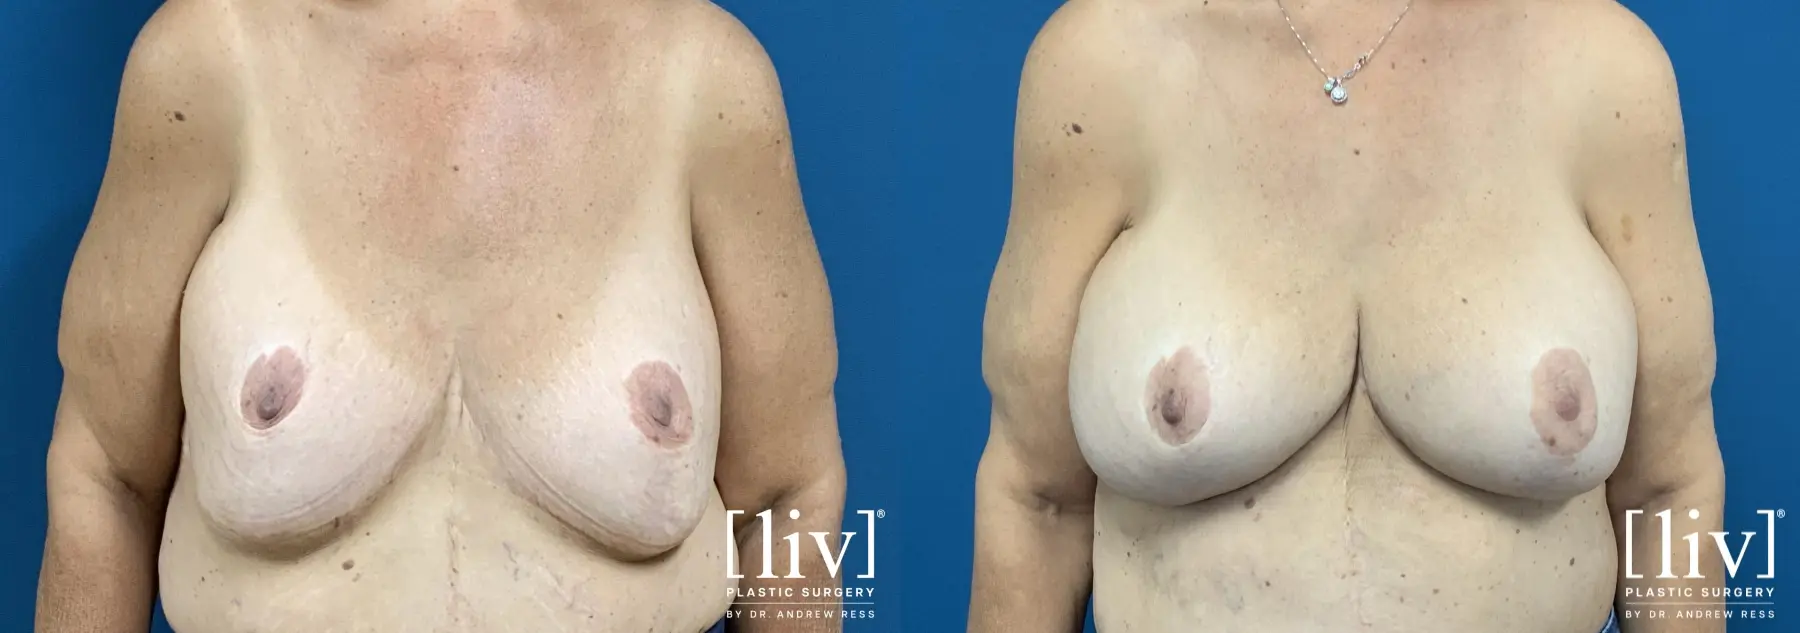 Breast Implant Exchange and Repositioning - Before and After  